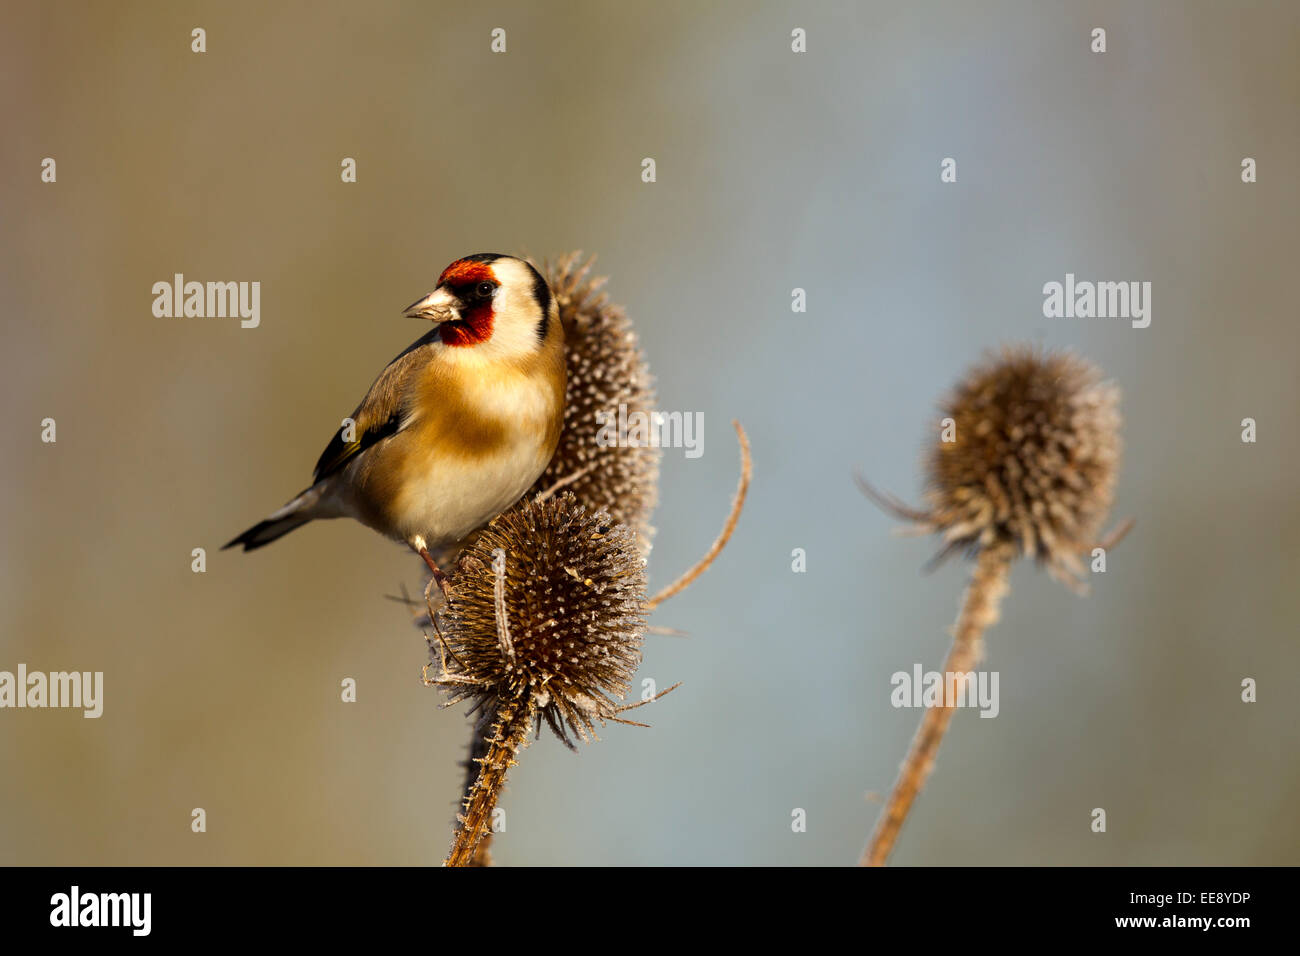 Goldfinch perched on a teasle Stock Photo